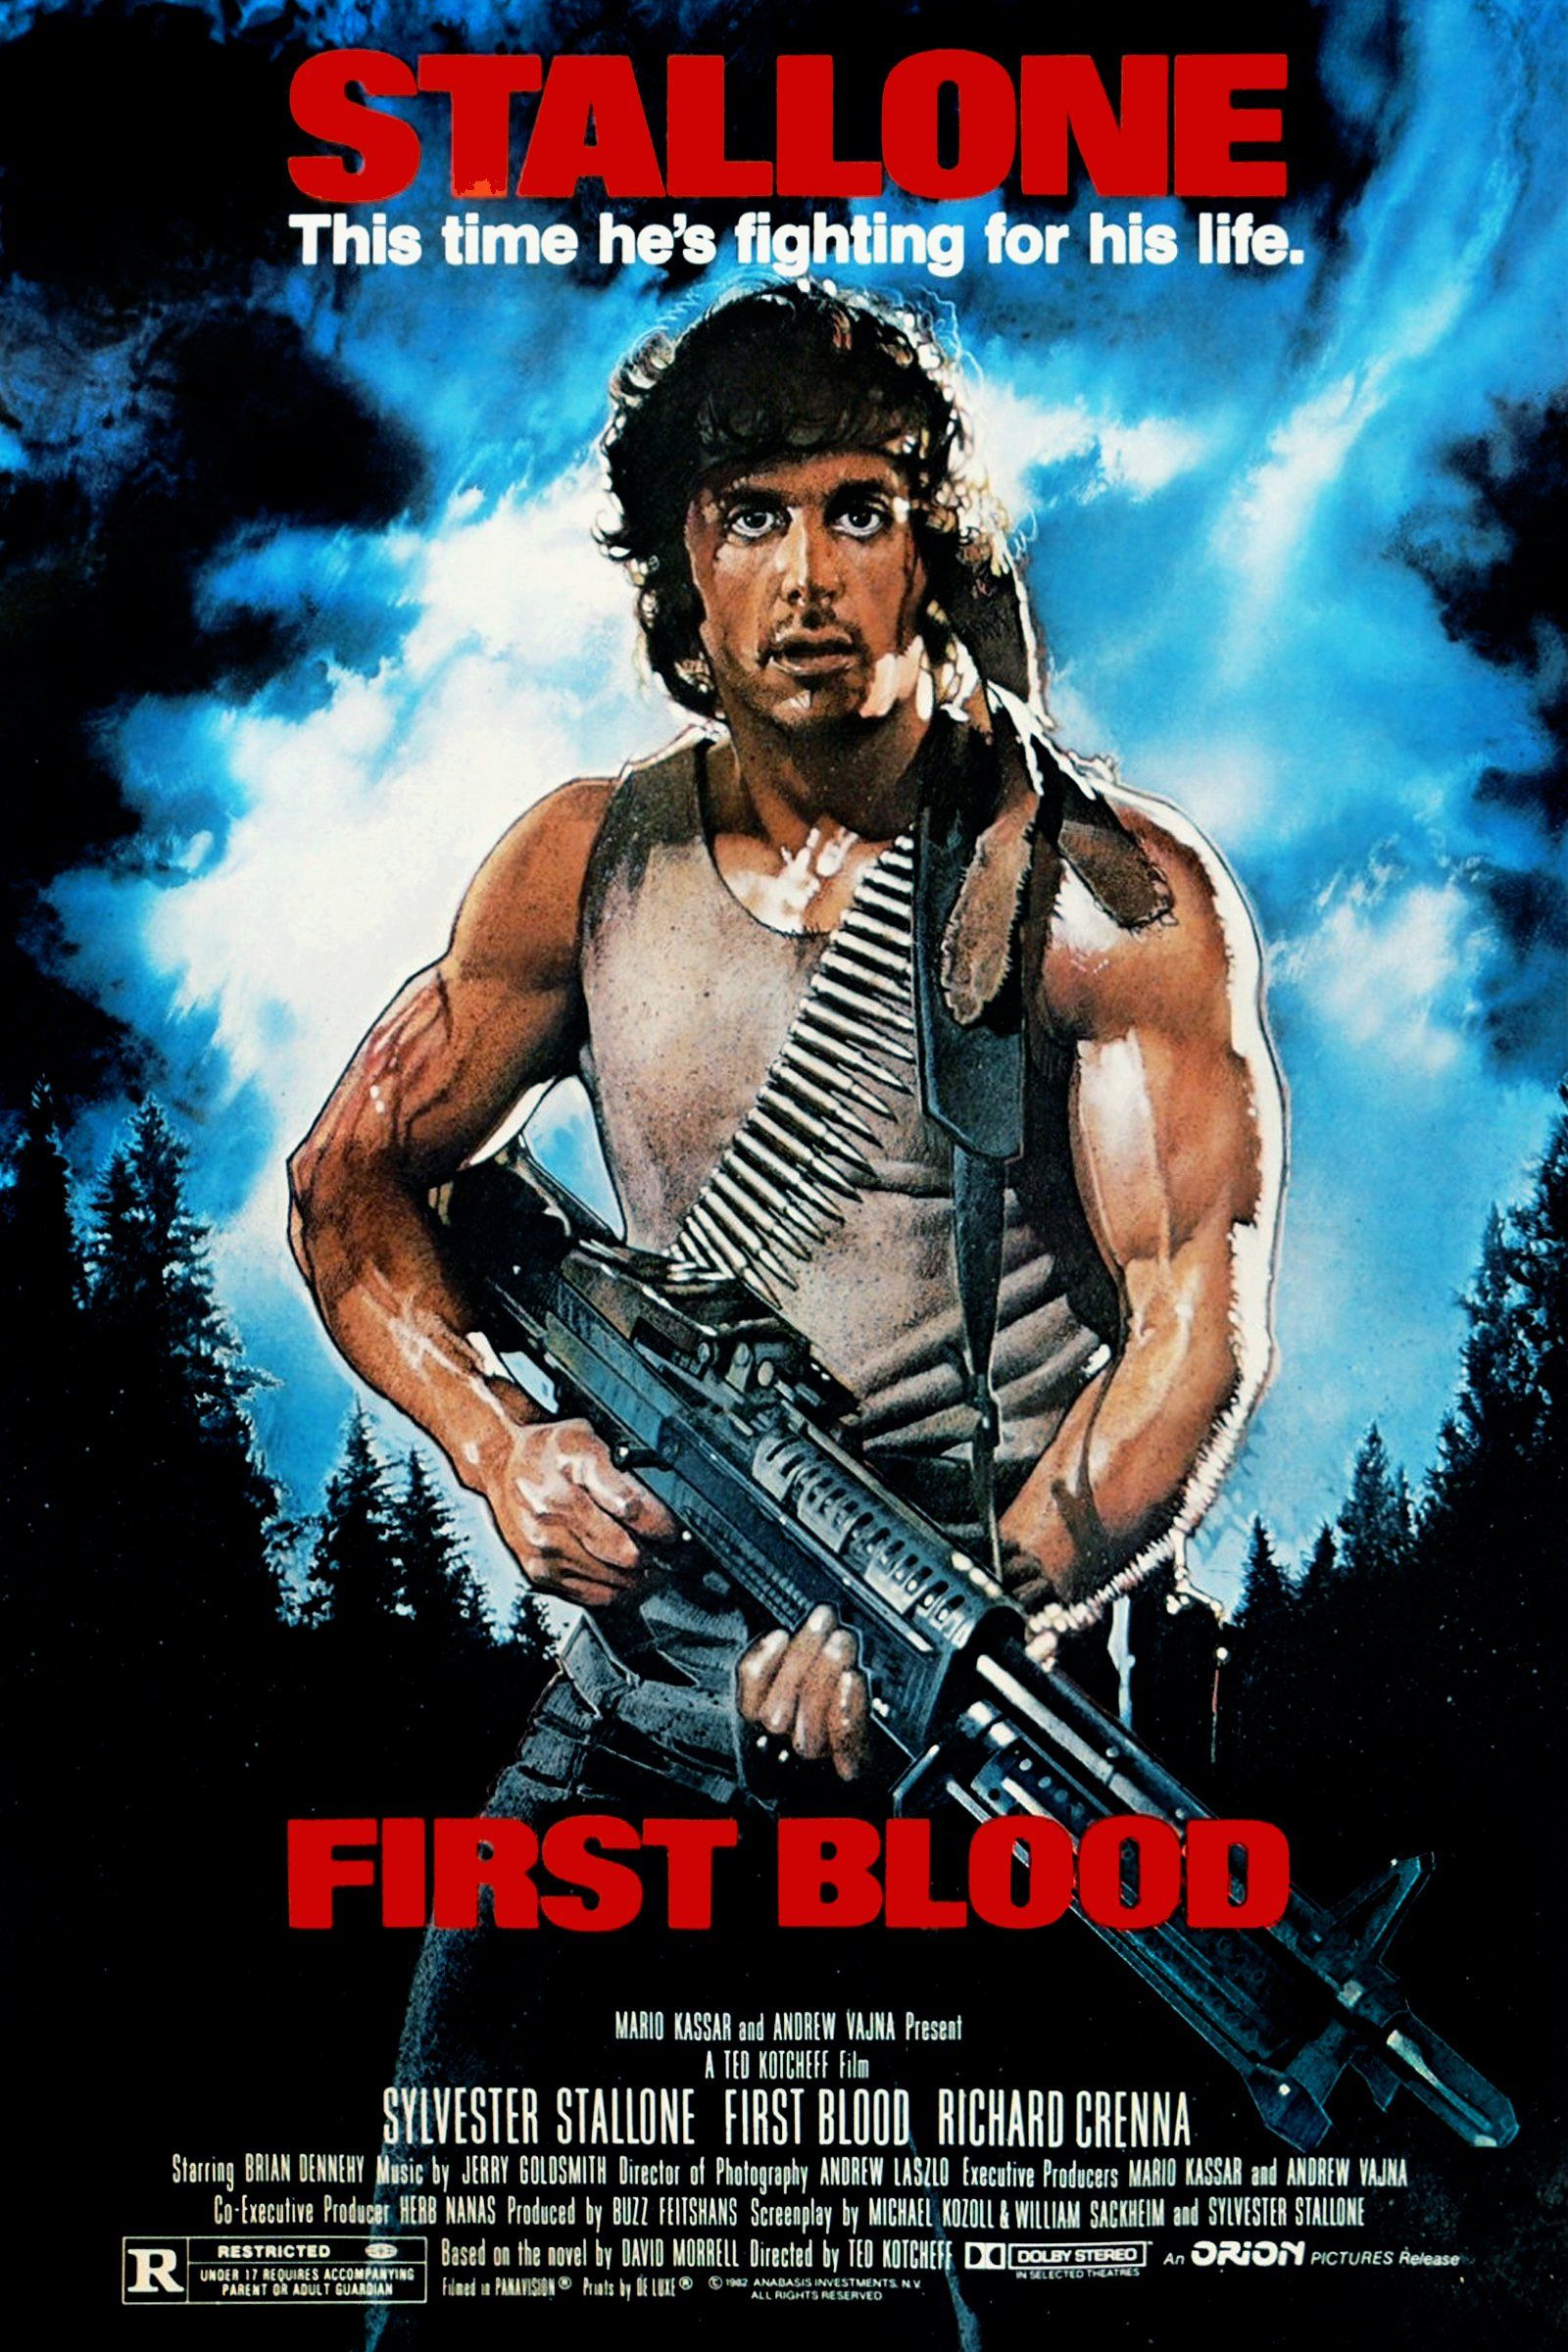 Sylvester Stallone in First Blood 1982 Film Poster